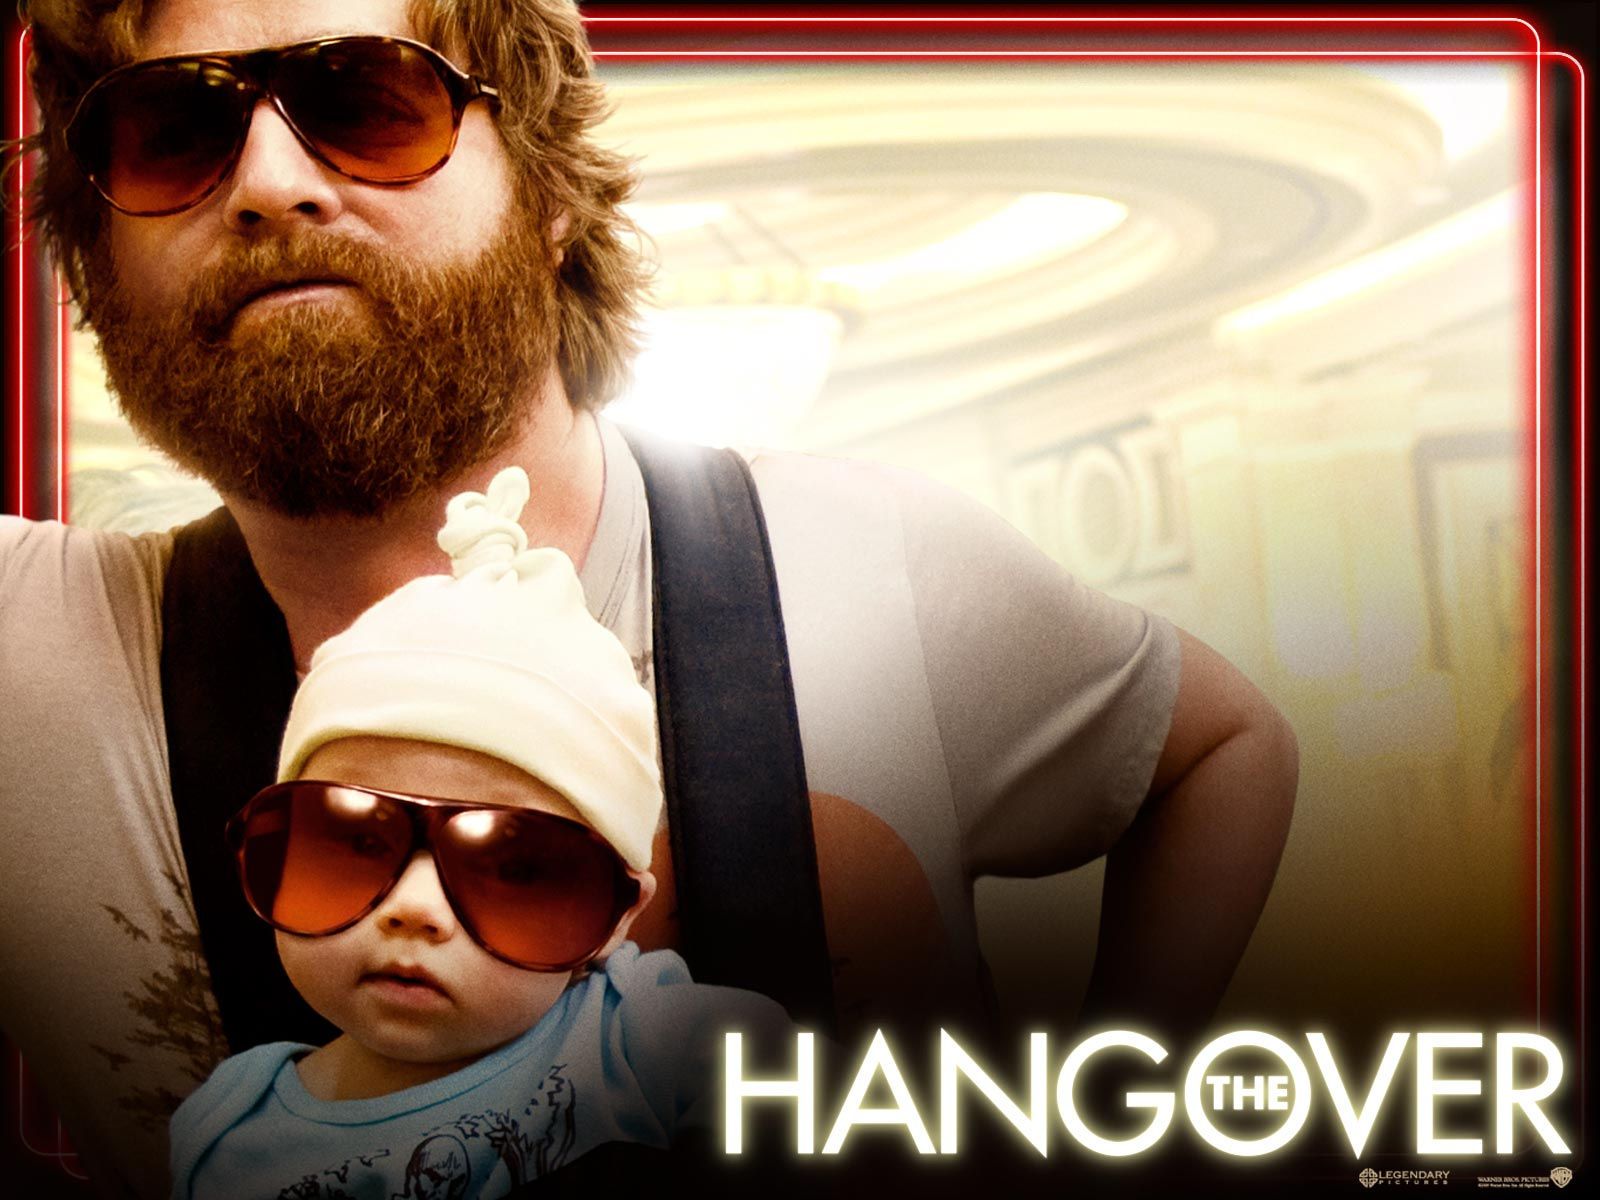 Product Placement in “The Hangover”